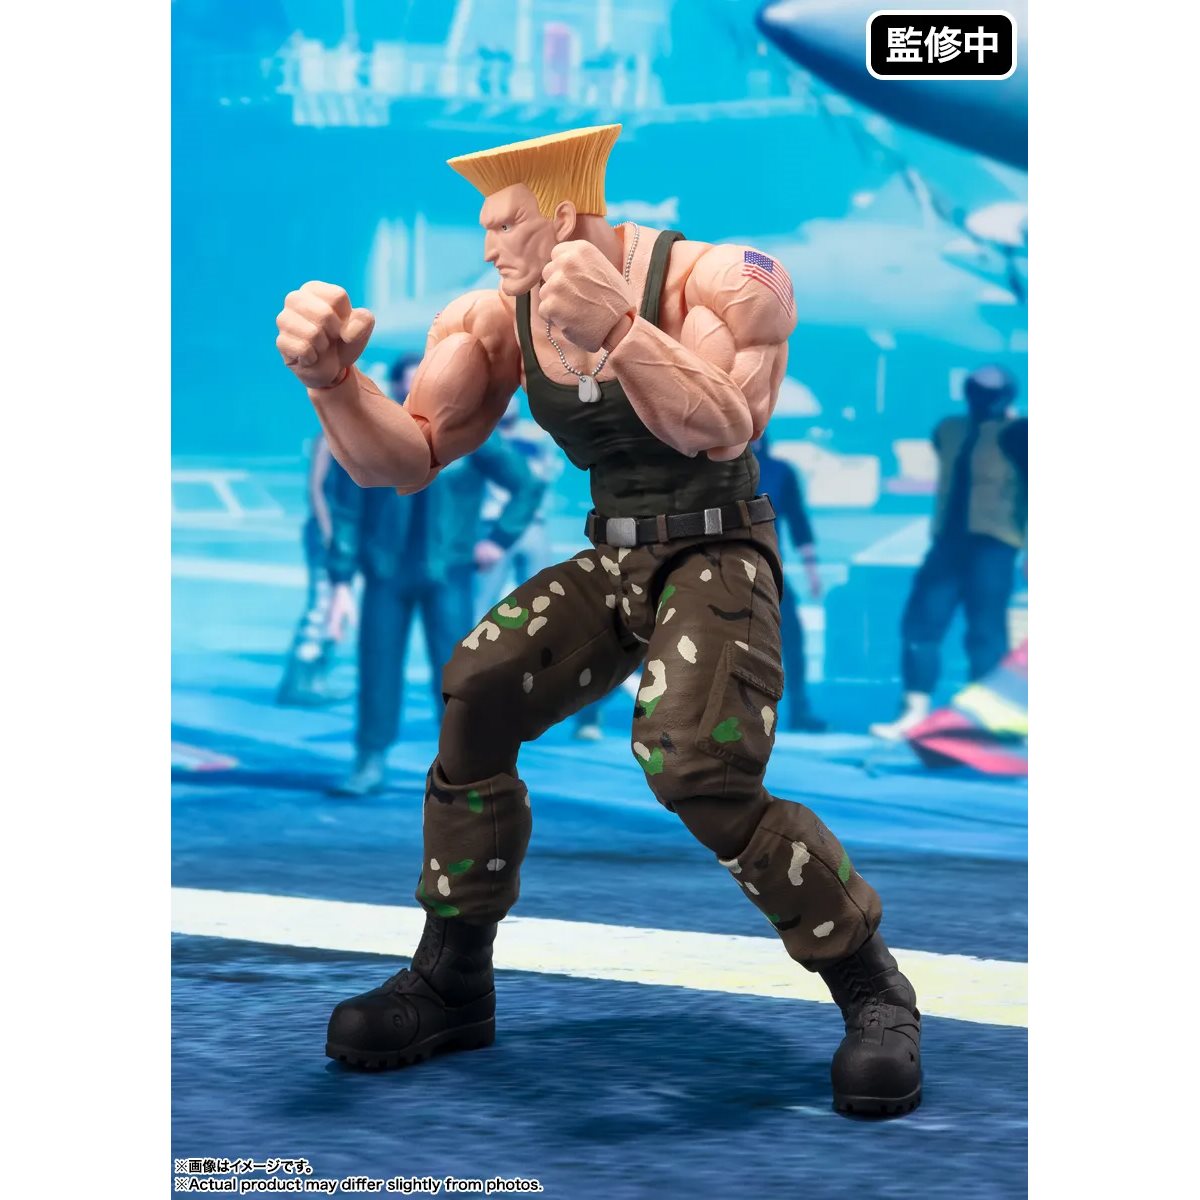 An Incredible Guide to Guile Costume From Street Fighter